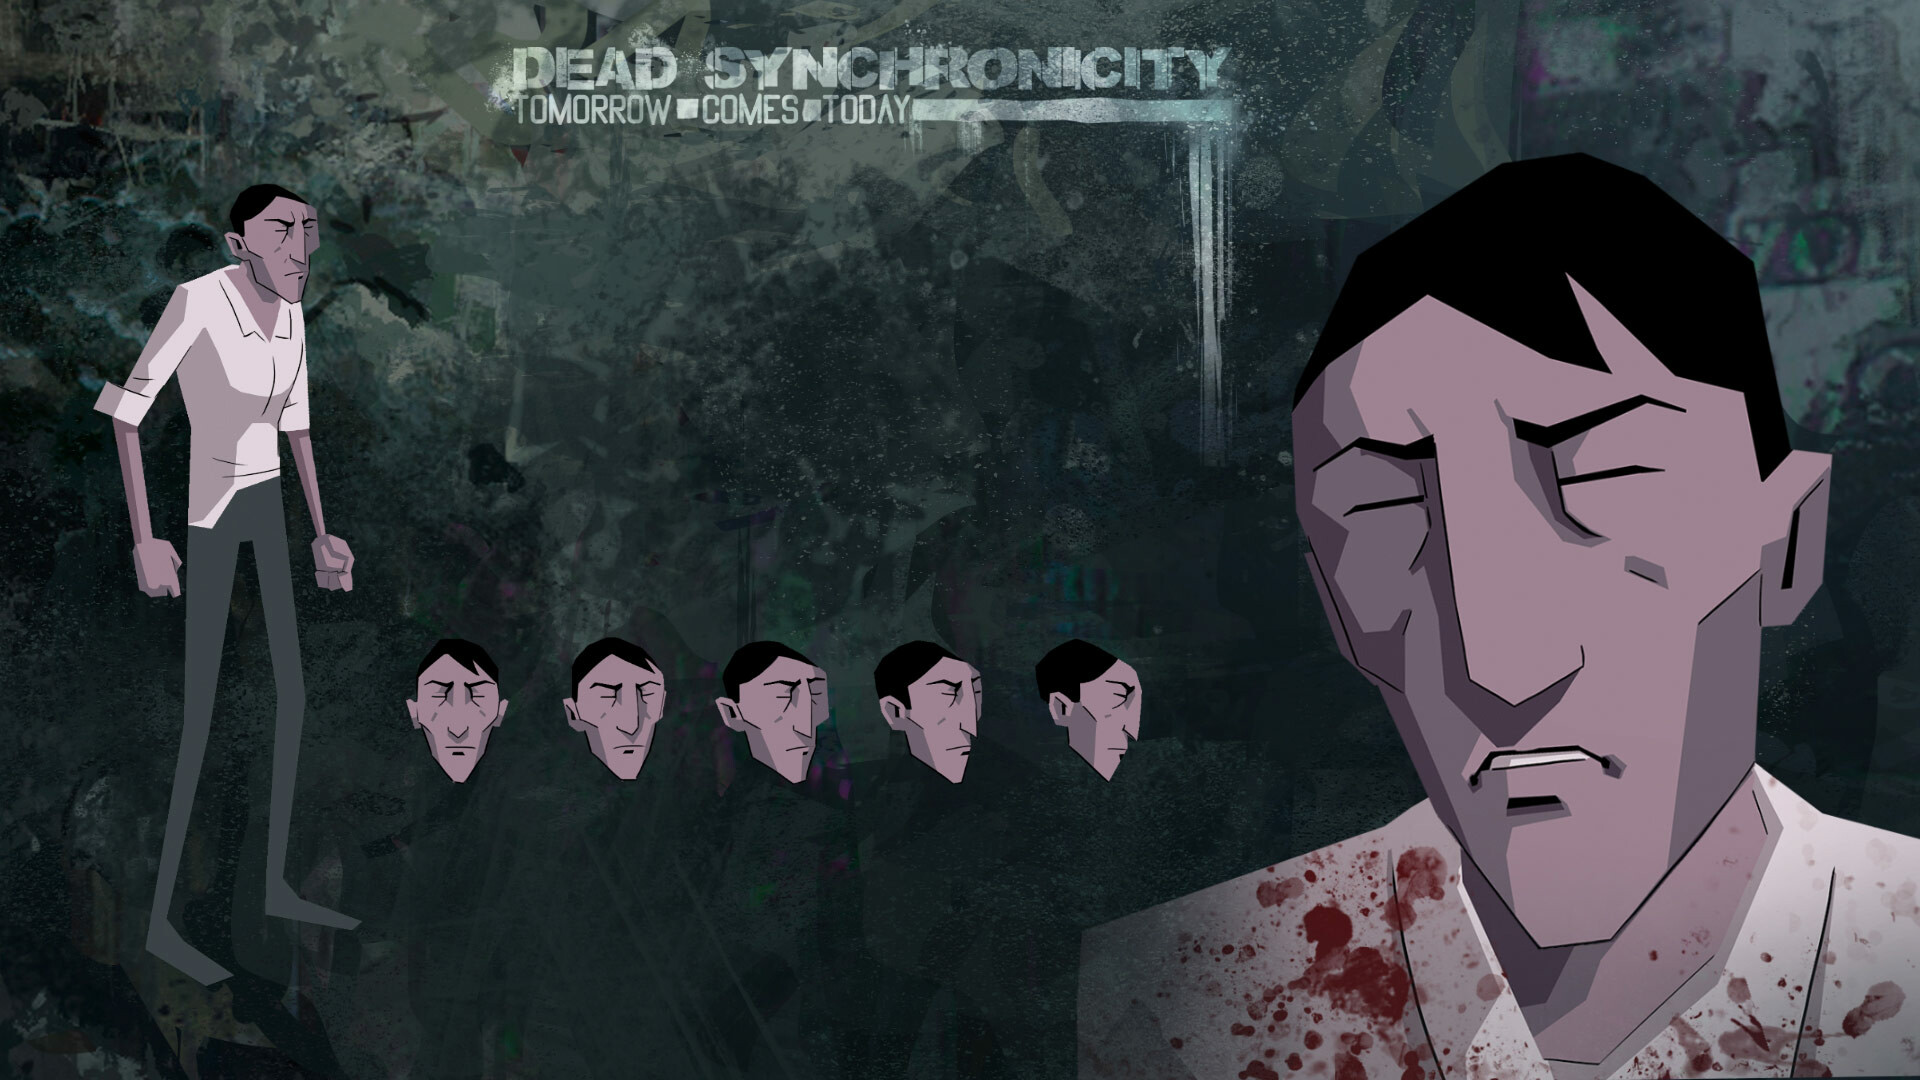 Deaths today. Dead Synchronicity: tomorrow comes today игра. Dead Synchronicity продолжение.